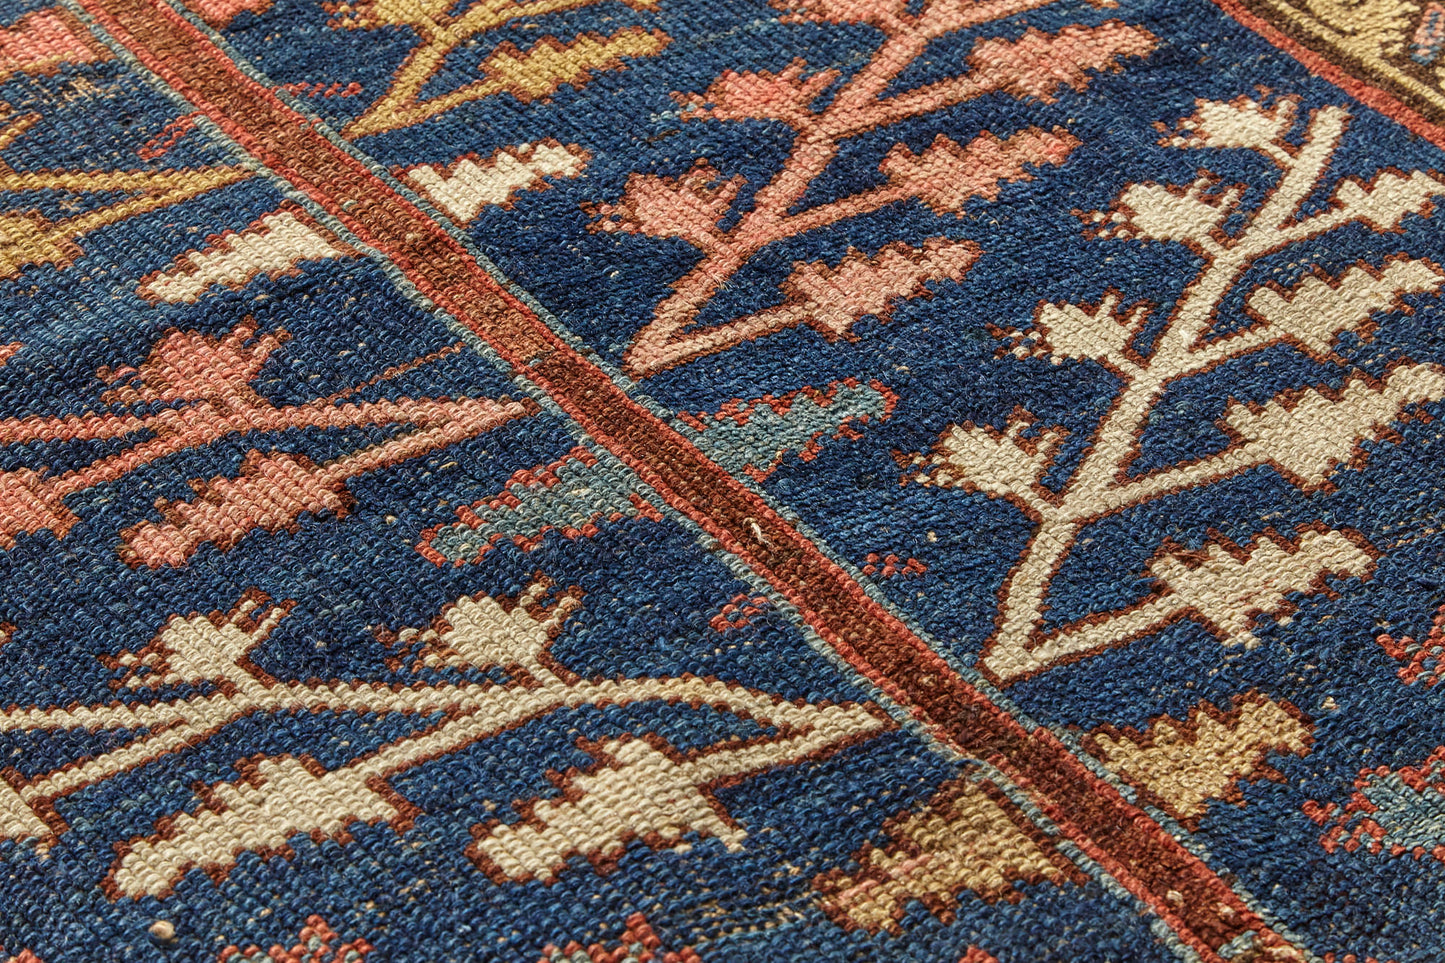 Detail of Kurdish antique Persian rug, hand woven with tree of life design on a blue background with gold, red, pink and cream branch and leaf designs throughout, would be beautiful in a bedroom, kitchen, hallway or living room - Available from King Kennedy Rugs Los Angeles